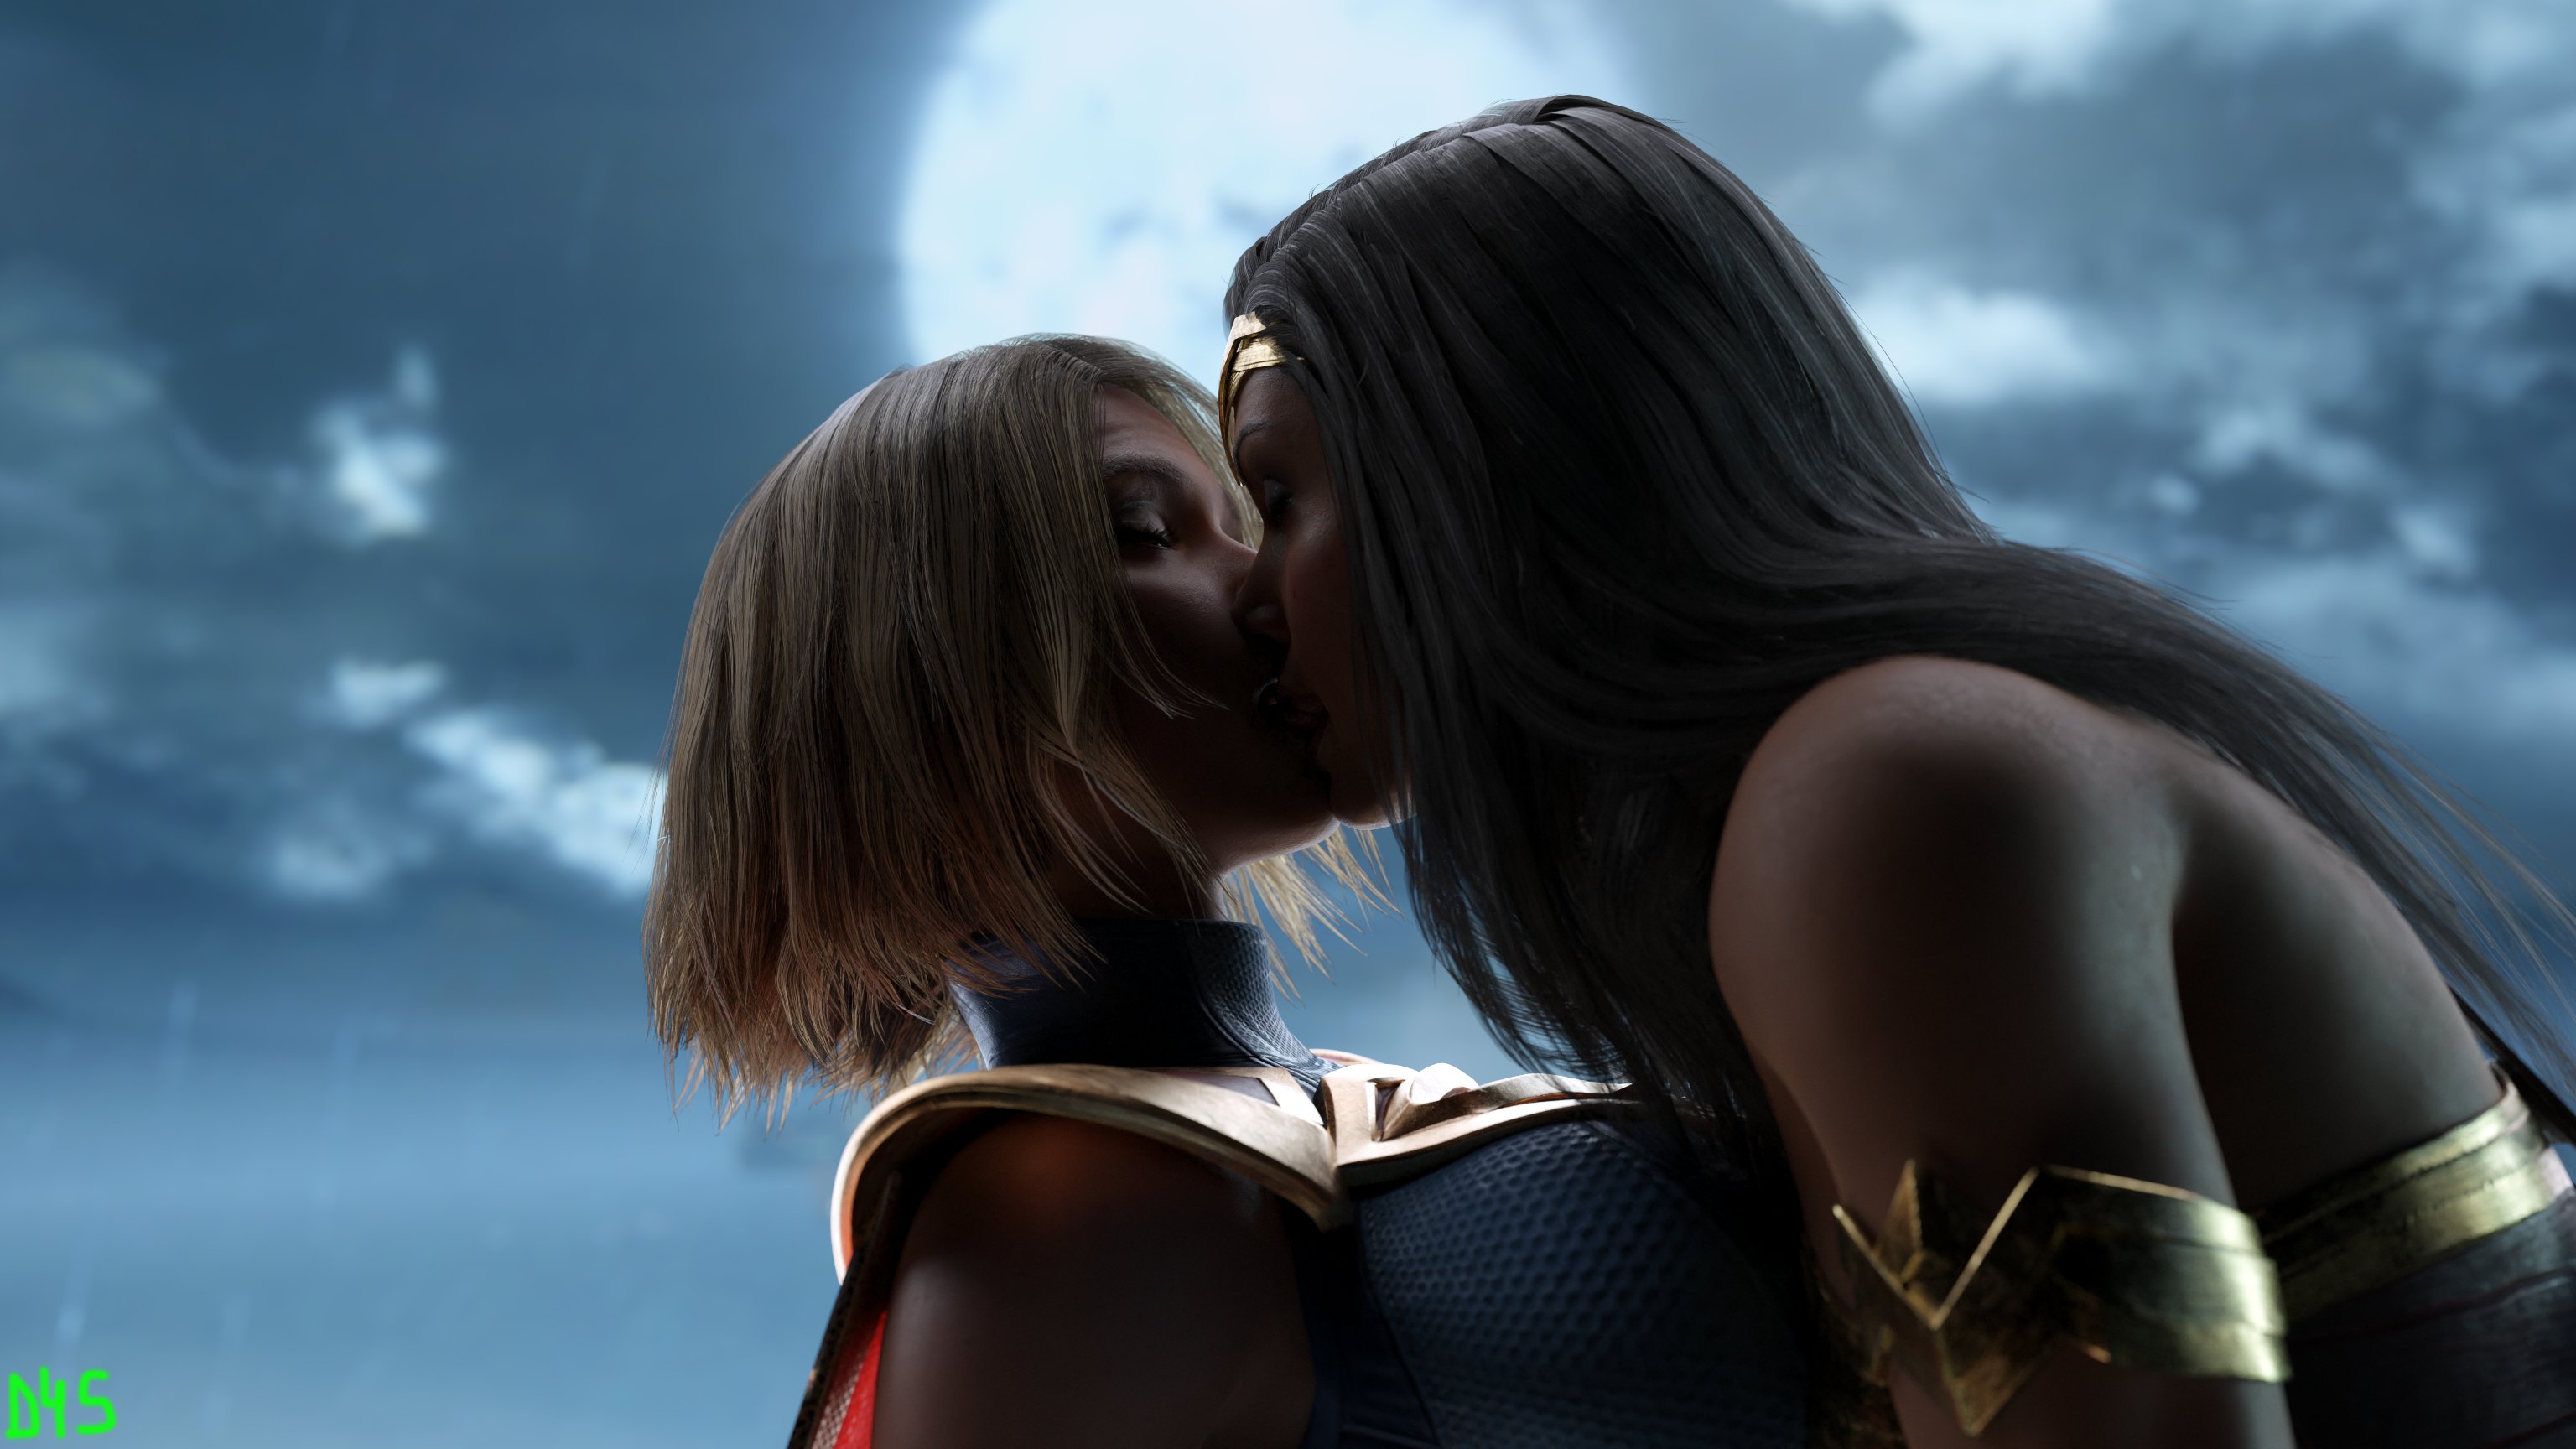 A Mesmerizing Gallery of Wonder Woman and John Legend's Sizzling Photo Shoot